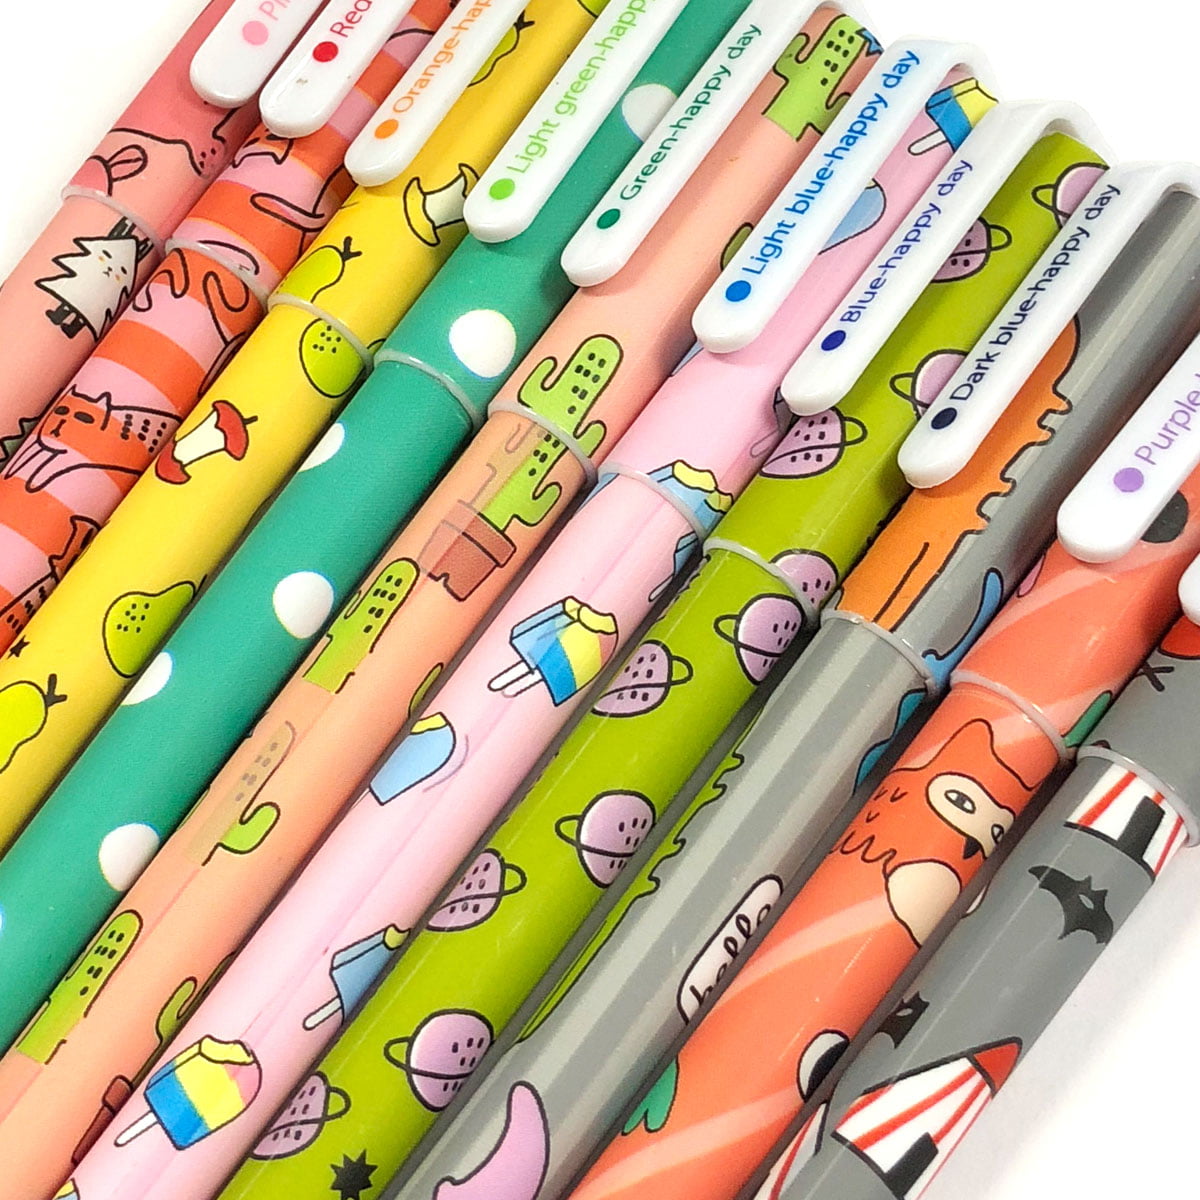 Wrapables Ostrich Ballpoint Pens, Novelty Pens for Office and